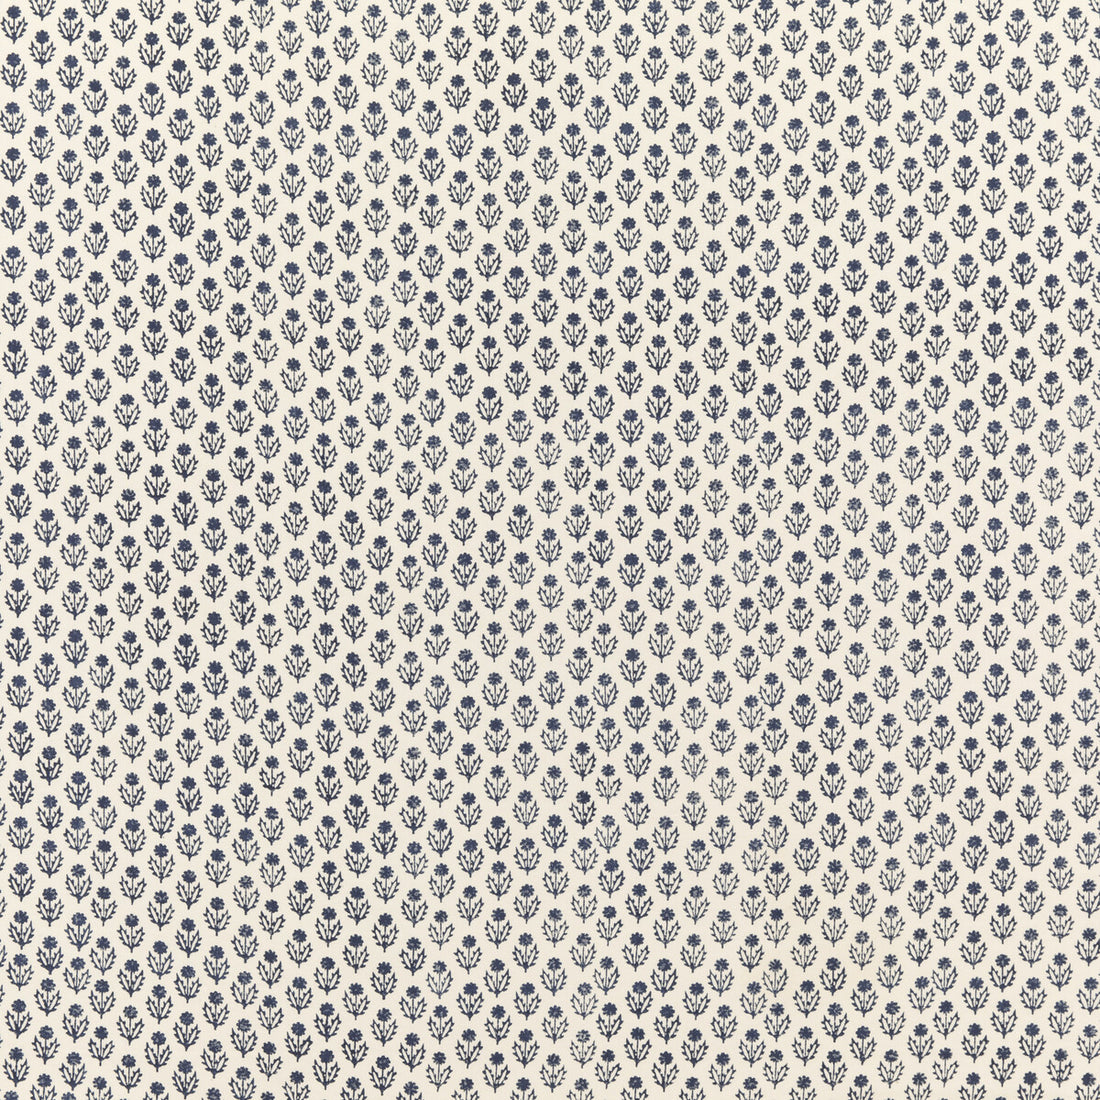 Avila fabric in indigo color - pattern PP50451.1.0 - by Baker Lifestyle in the Homes &amp; Gardens III collection